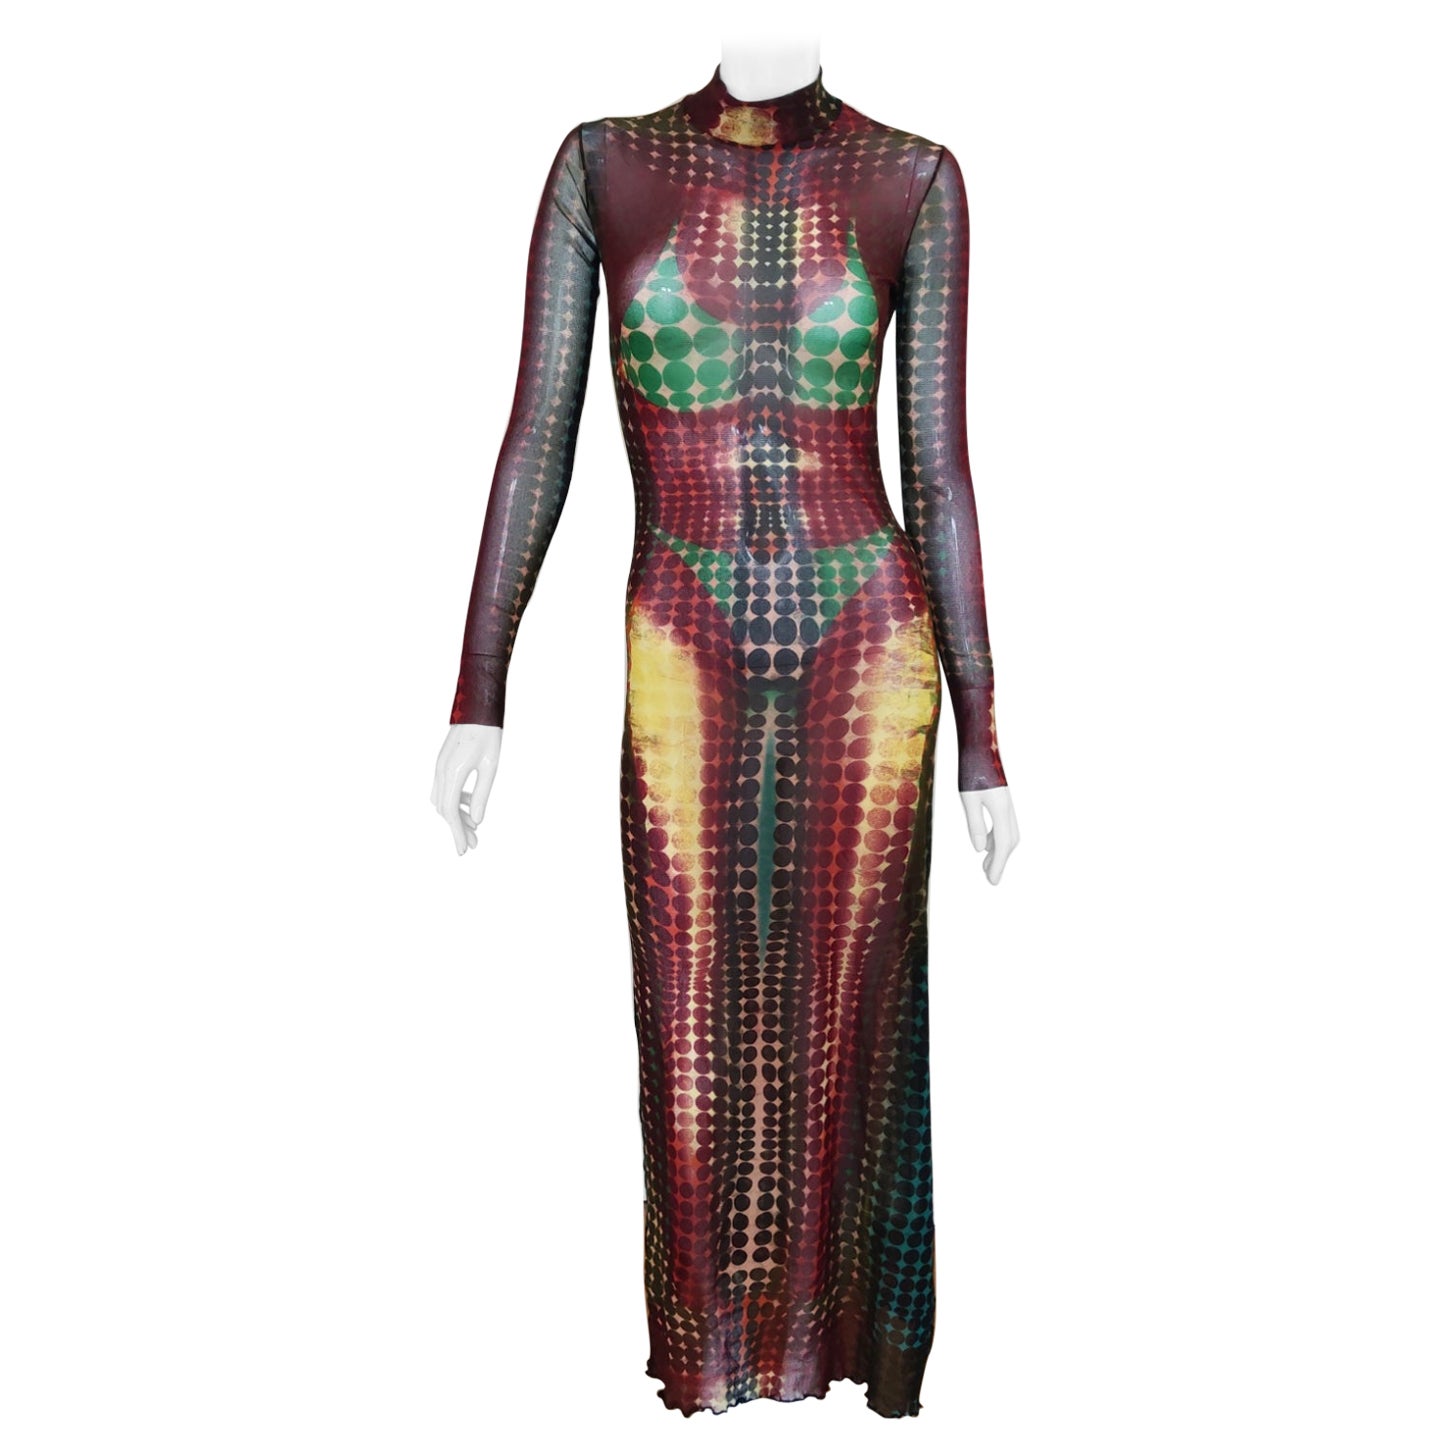 Iconic Jean Paul Gaultier Cyberdot 1995 F/W Runway Haute Couture Mad Max Victor  For Sale